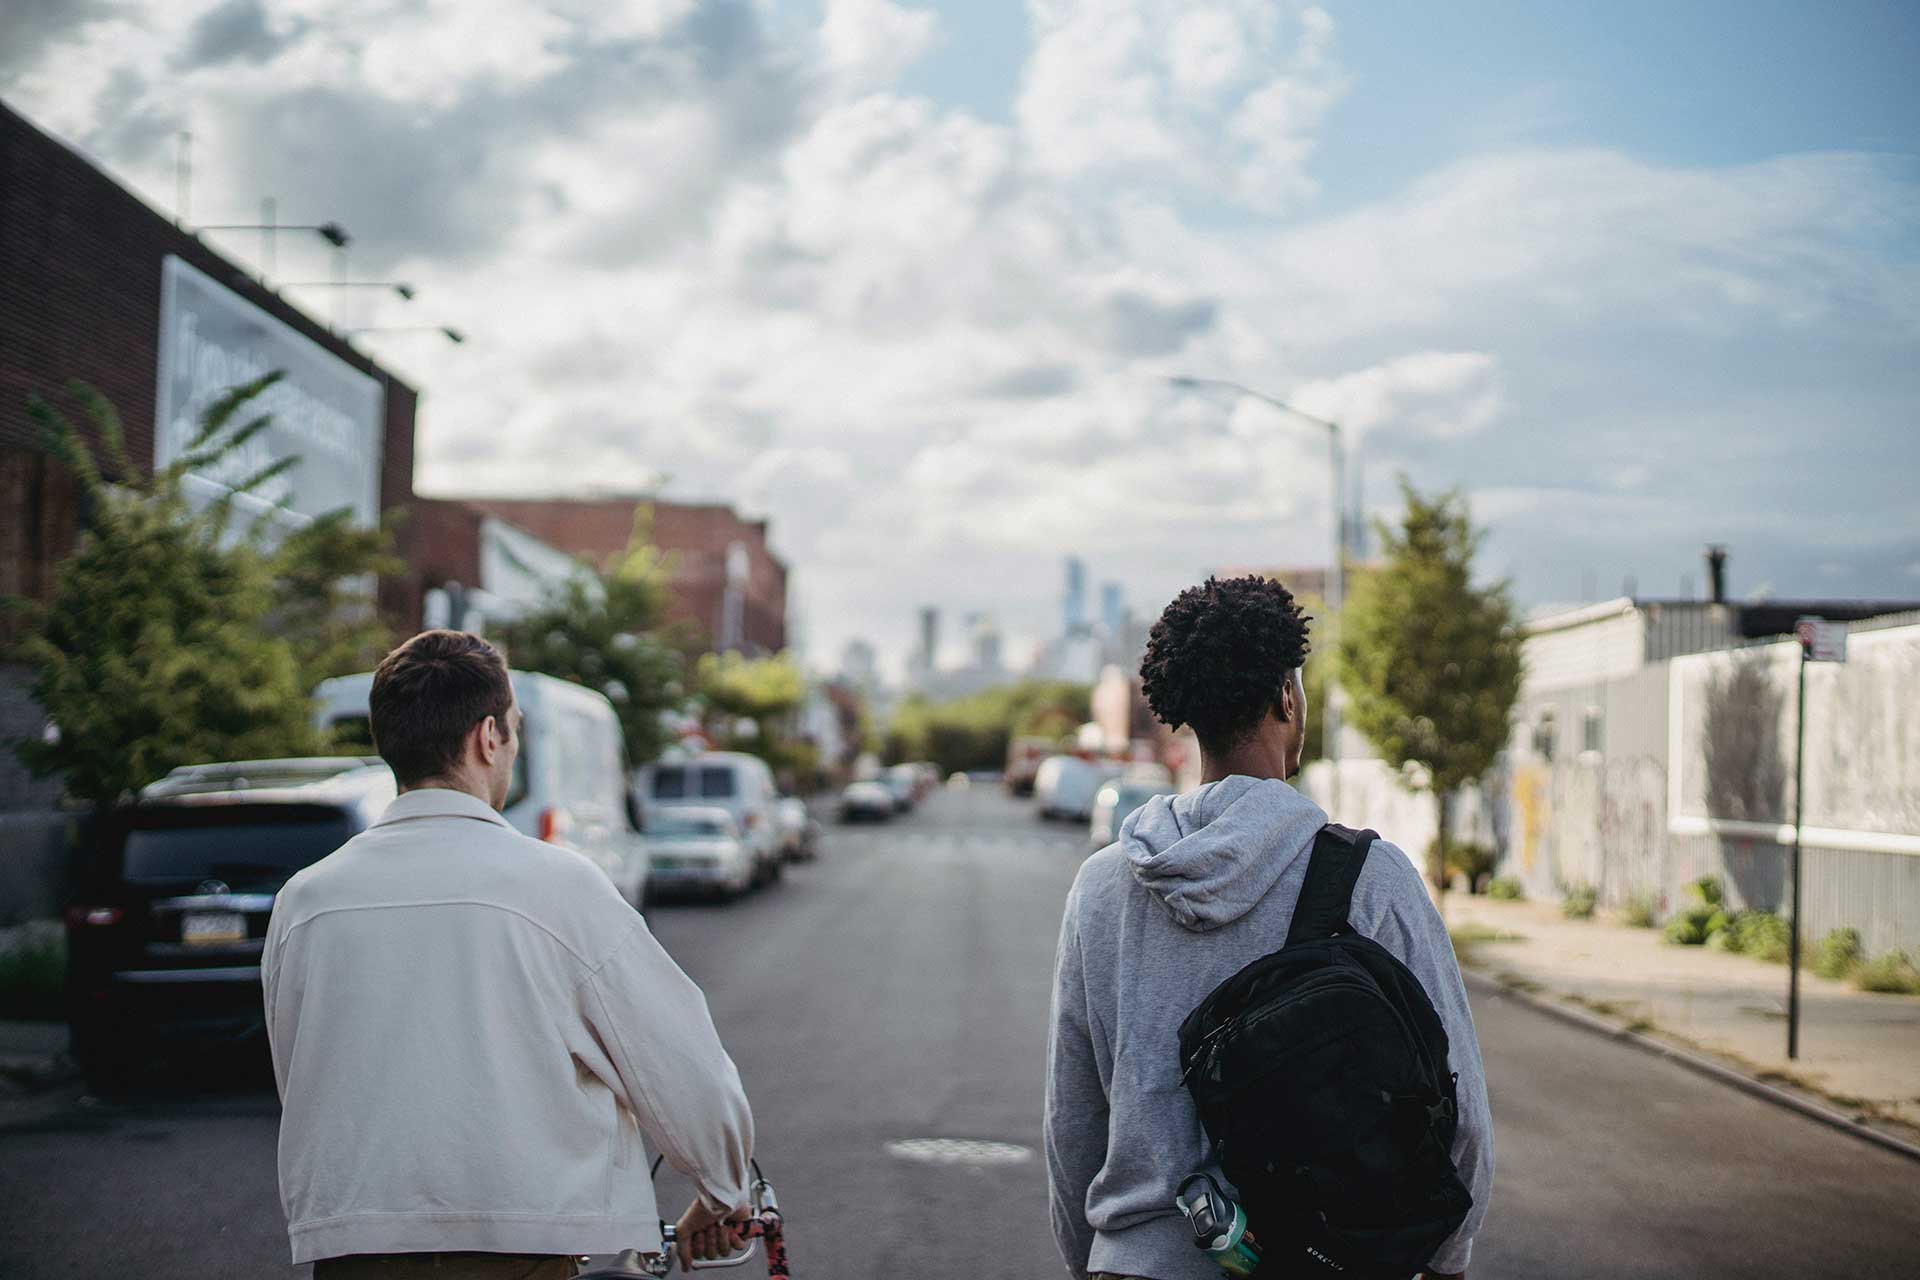 Two figures, photographed from behind, walk on a wide city street.